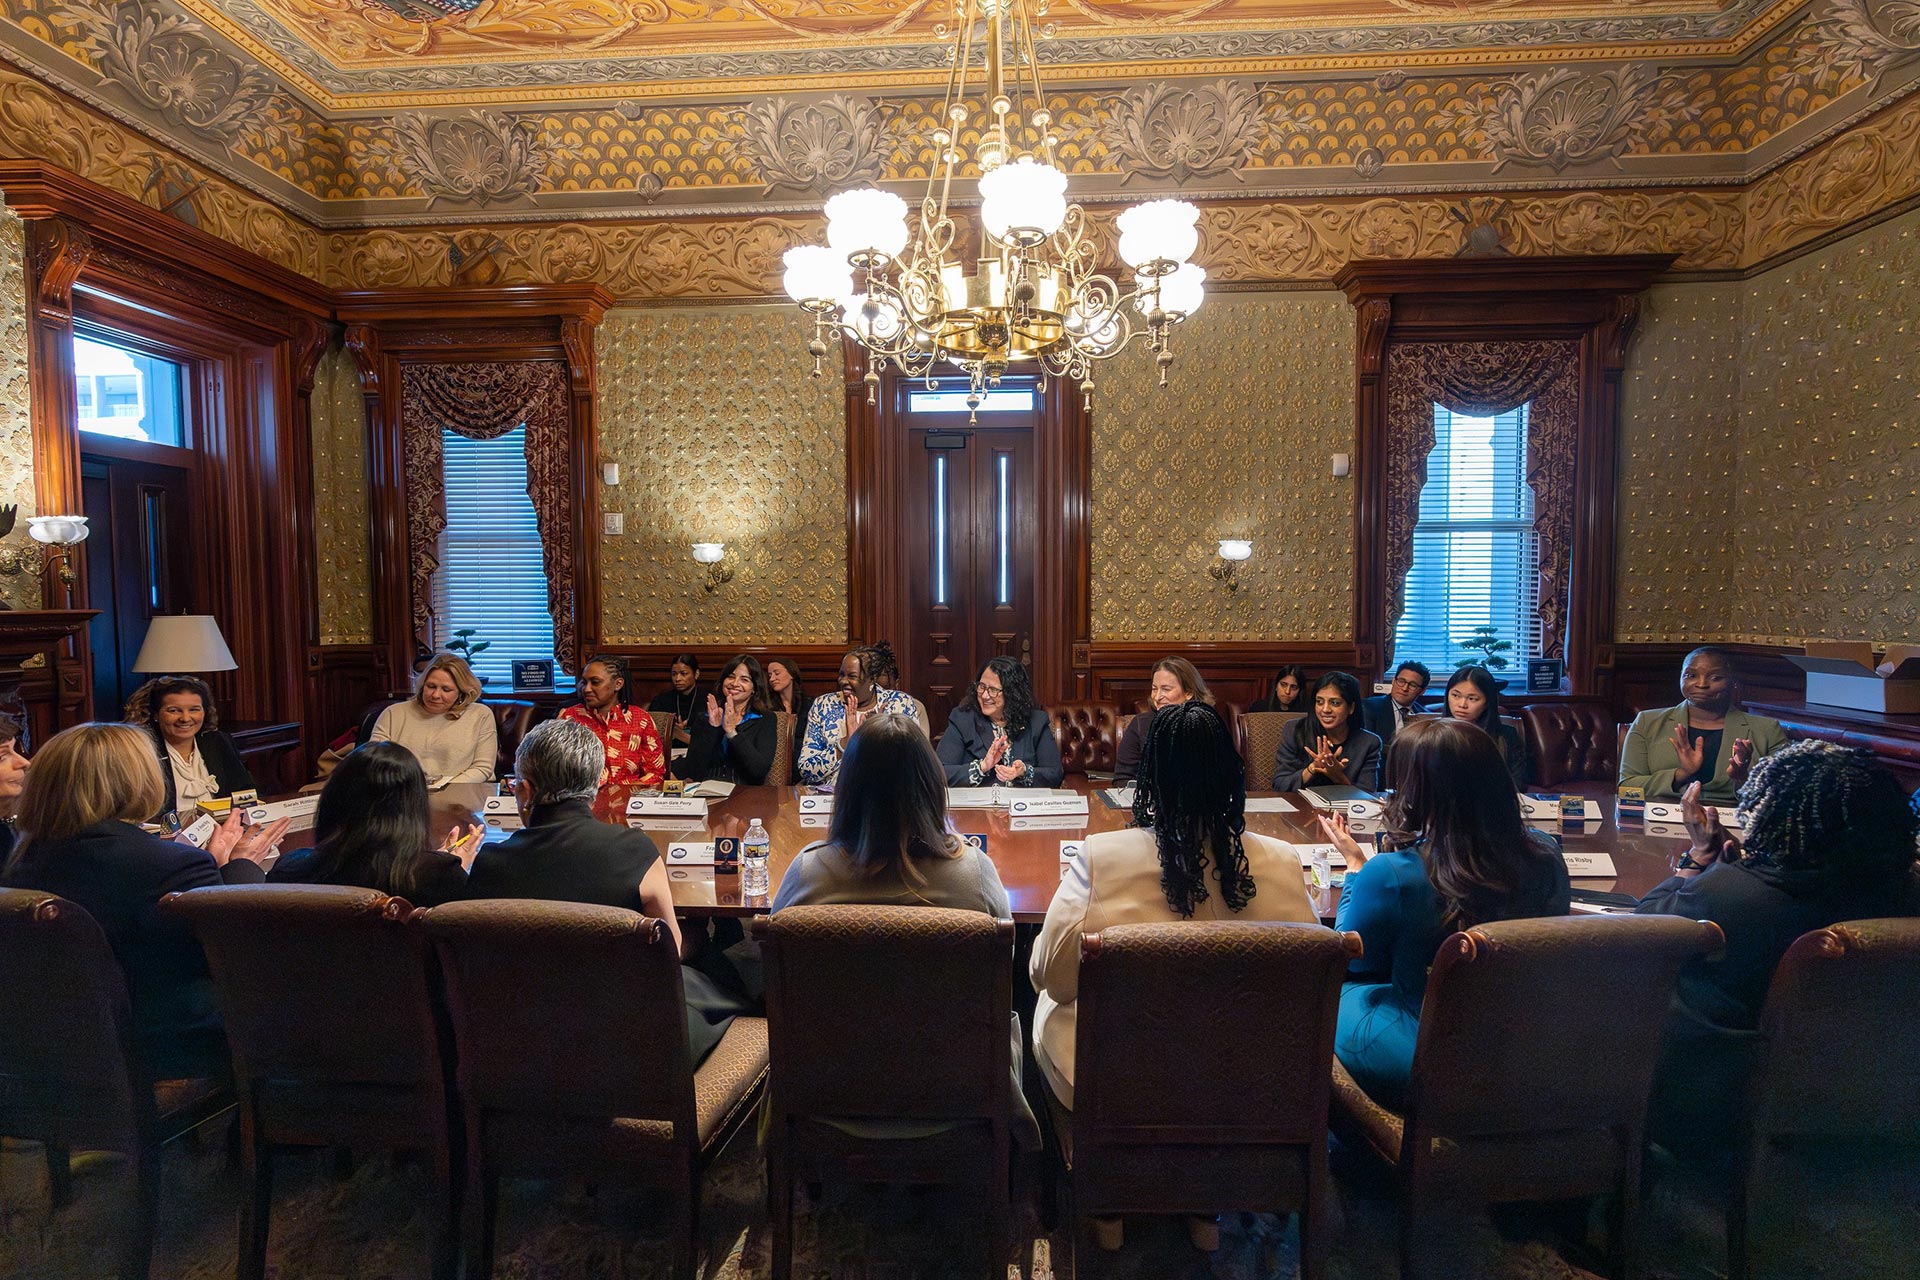 WV SBDC participates in first-ever Child Care Roundtable at White House